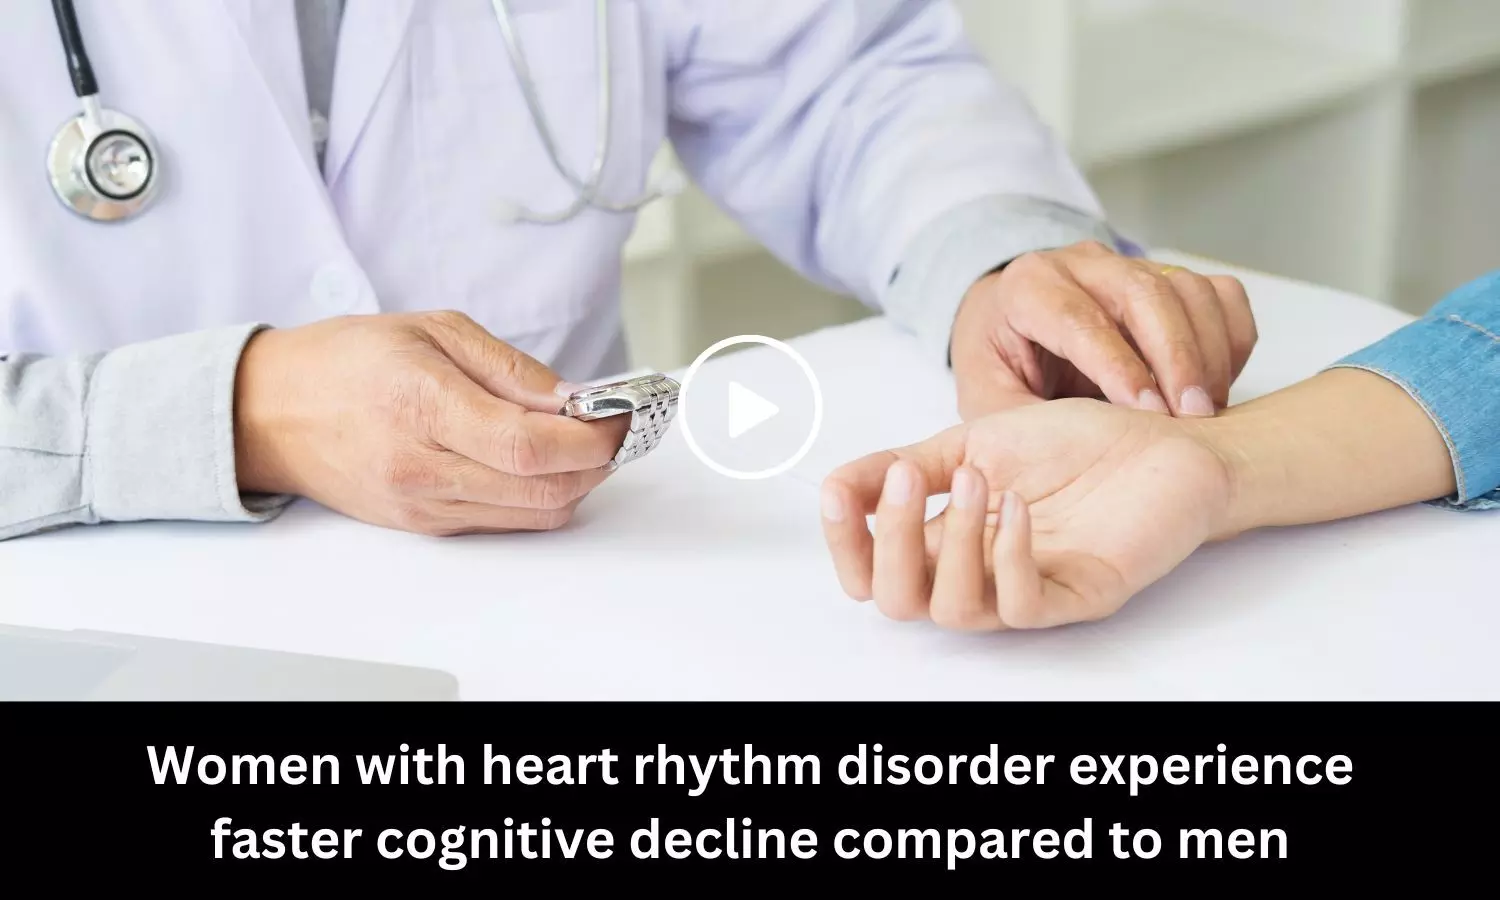 Women with heart rhythm disorder experience faster cognitive decline compared to men